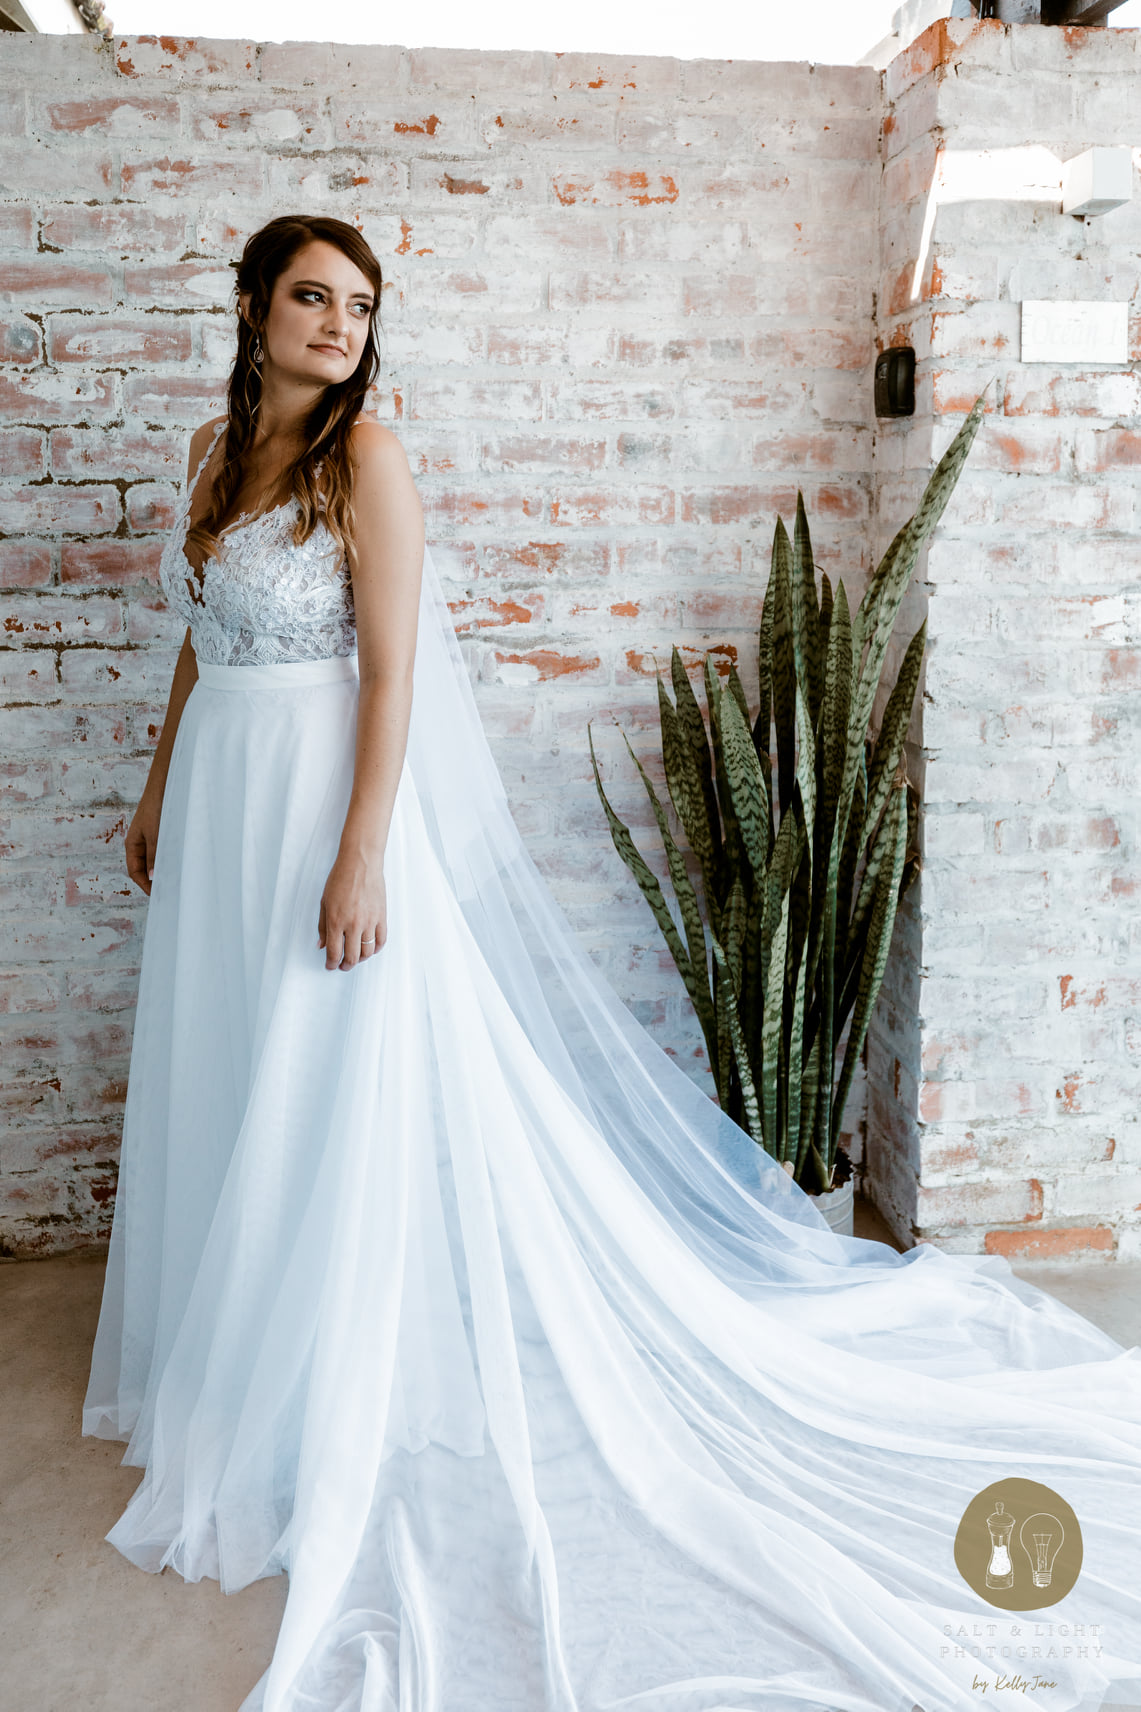 SILVER GLITTER AND LACE BRIDAL GOWN